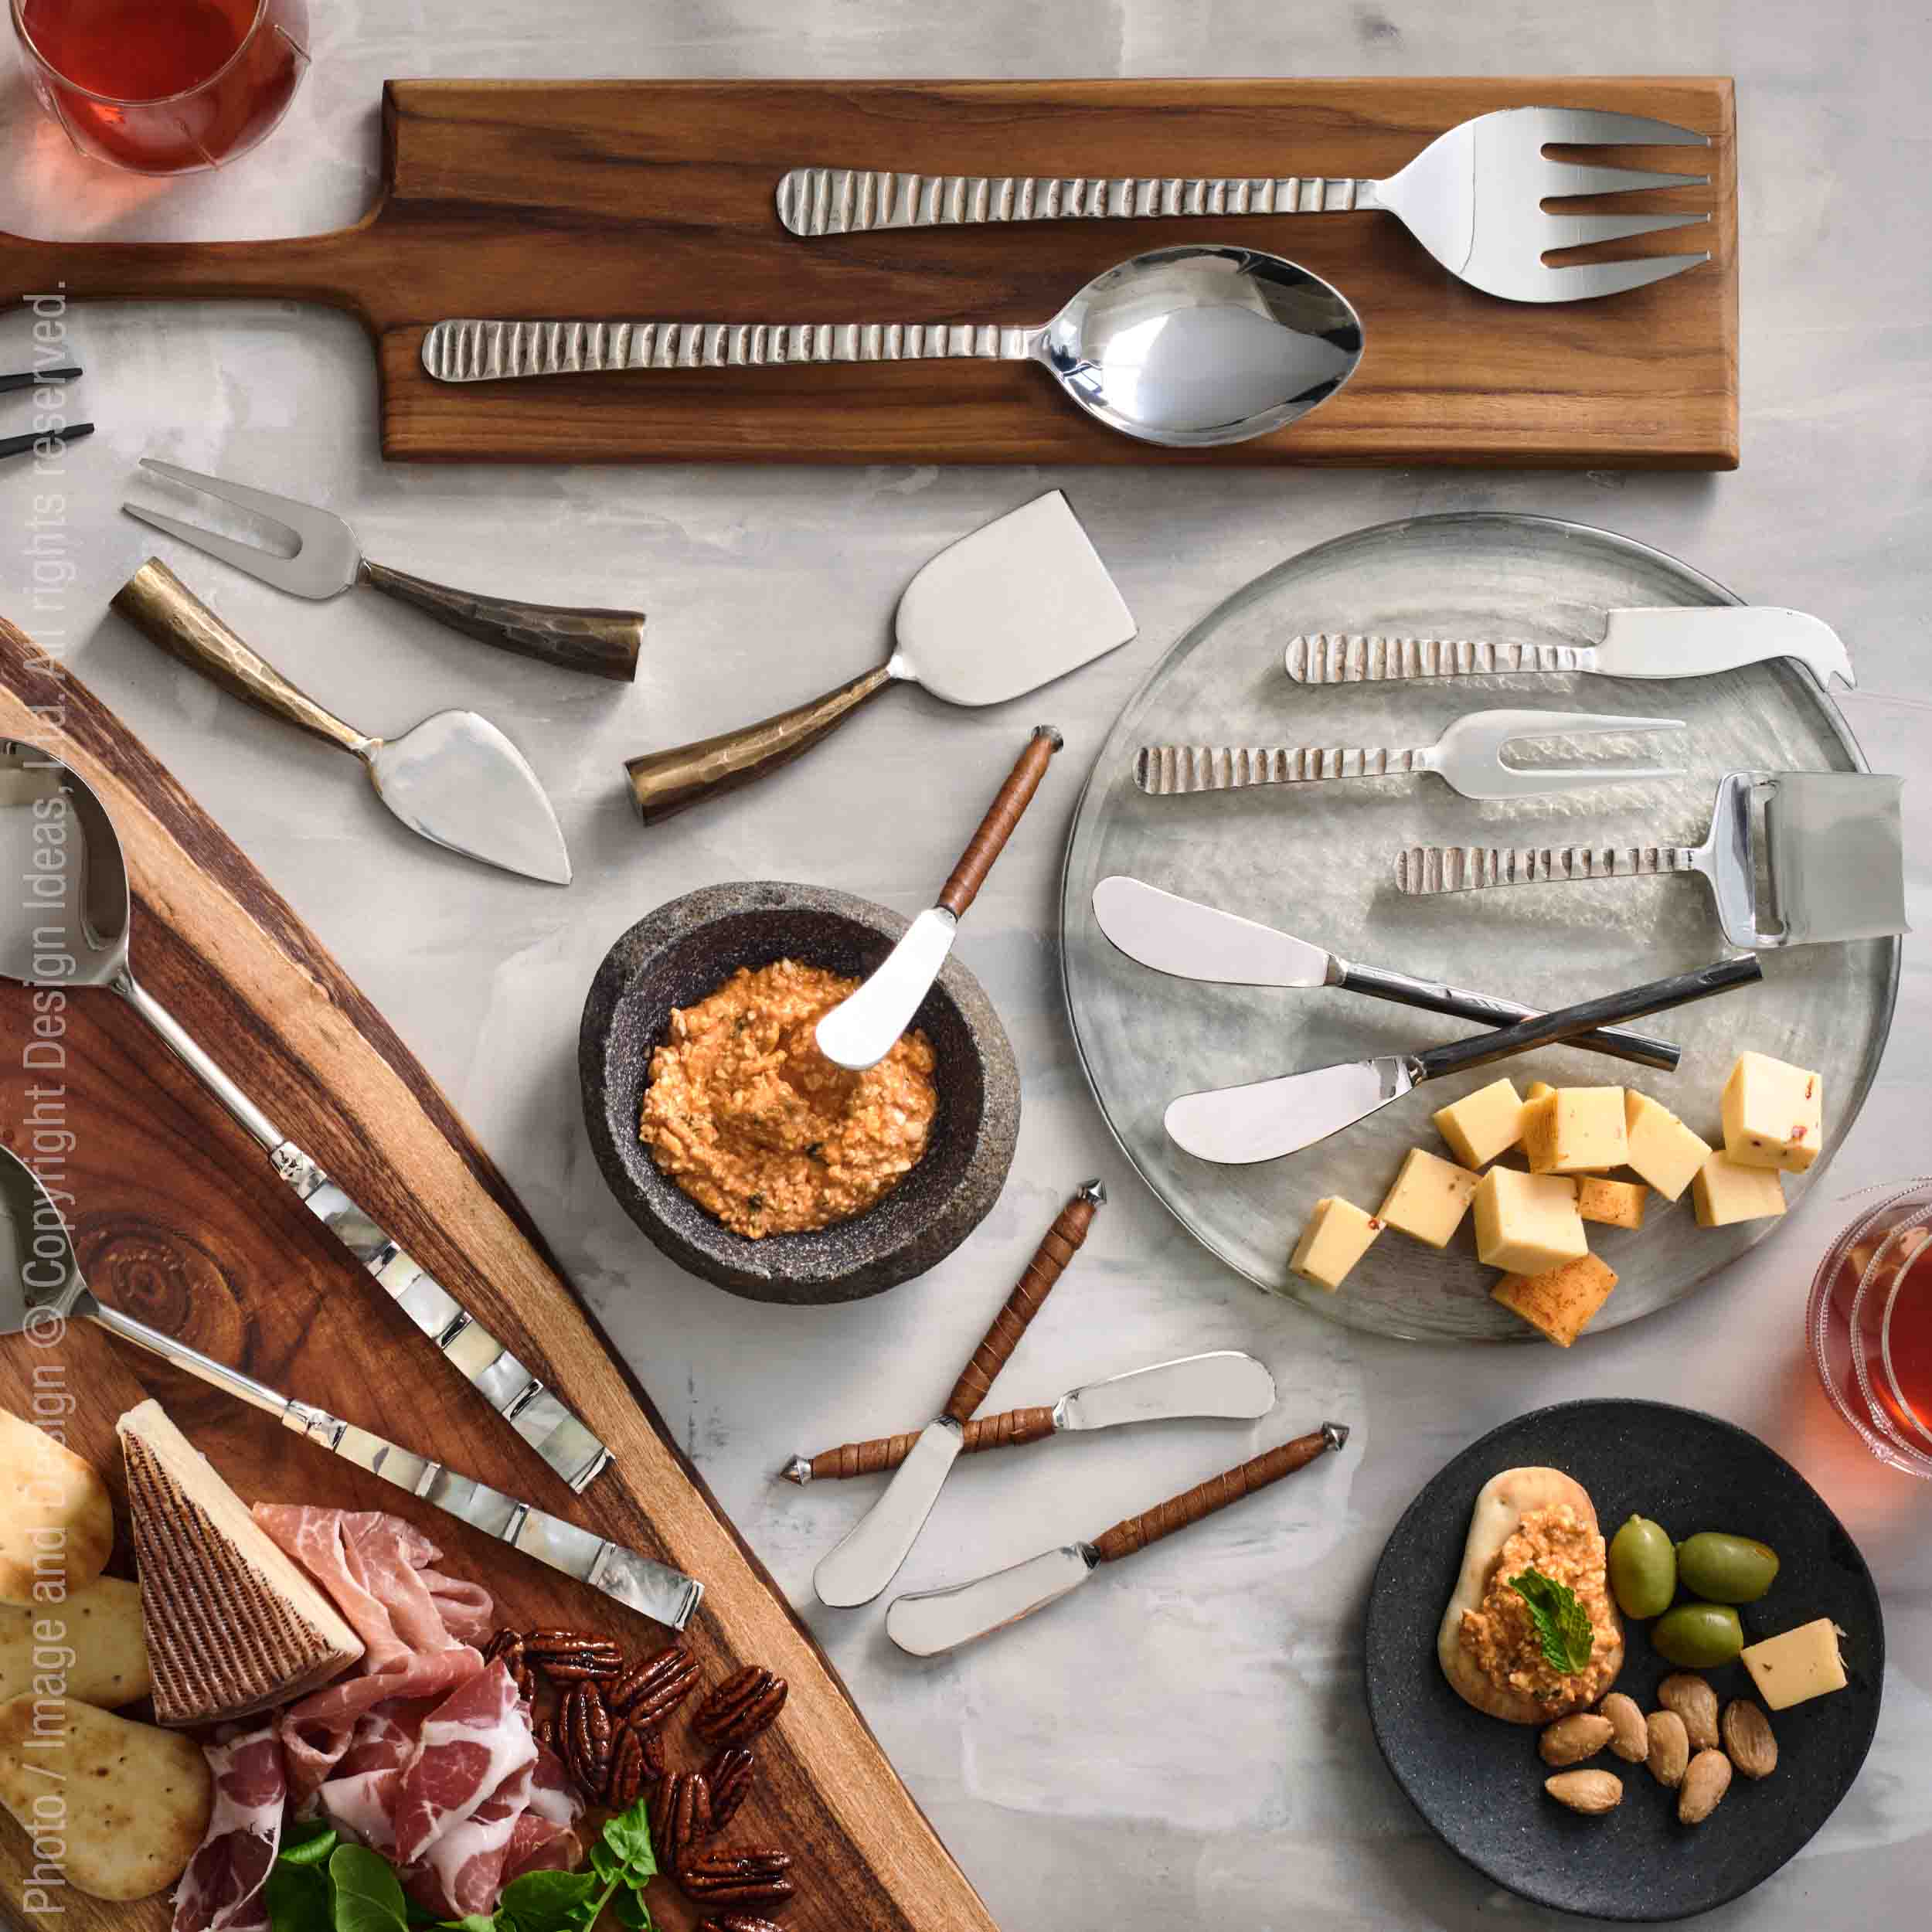 Abalon™ salad servers - Silver | Image 2 | Premium Utensils from the Abalon collection | made with Stainless Steel for long lasting use | texxture